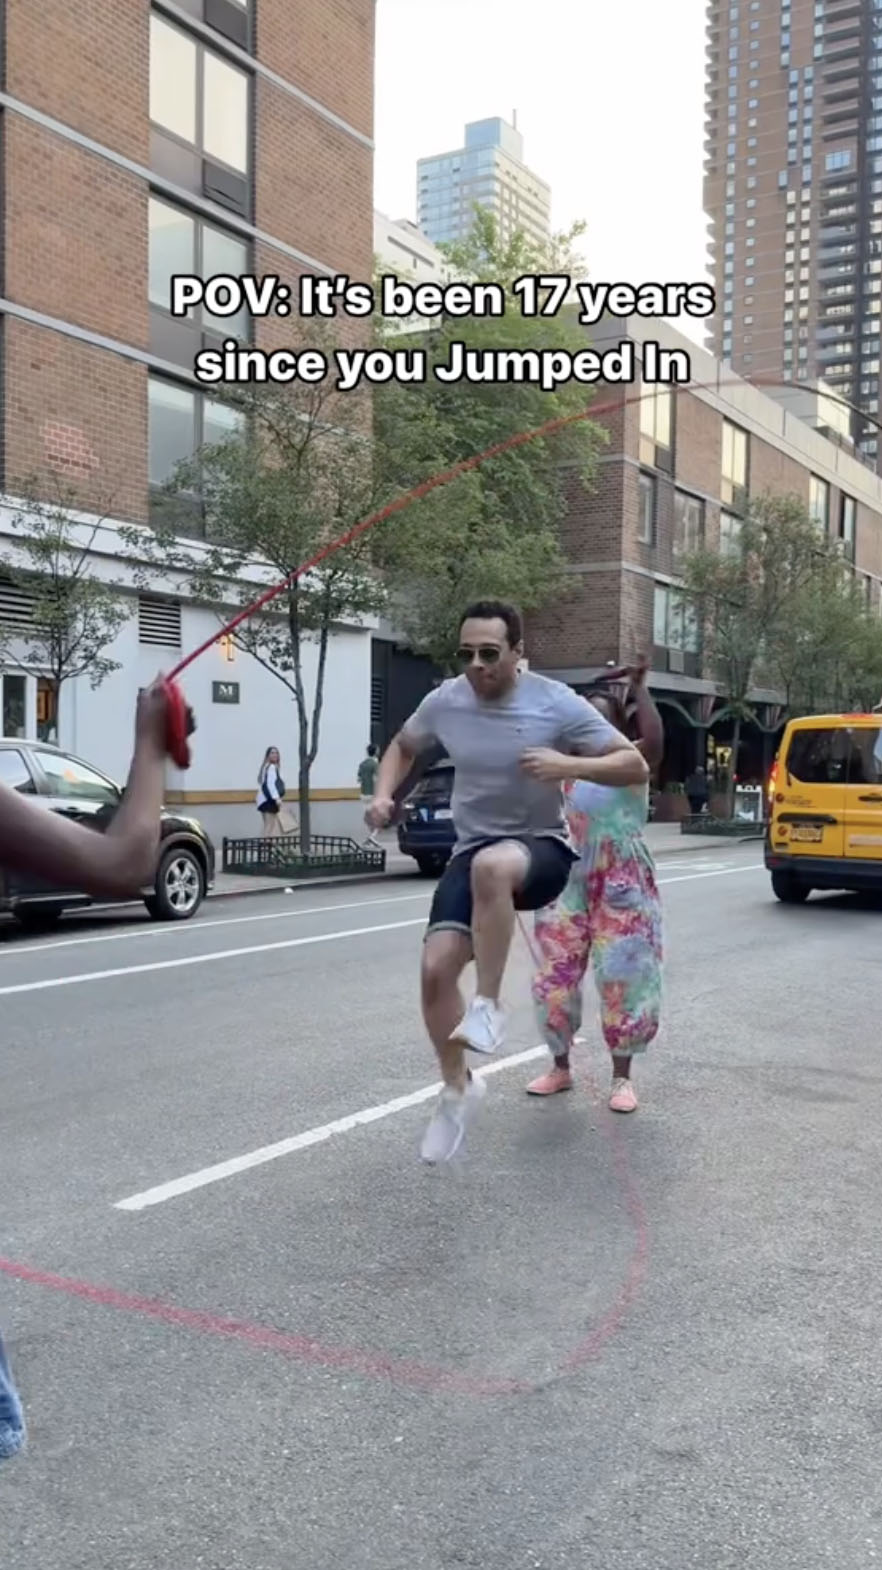 In the video, the actor was shown jump roping double dutch in an NYC neighborhood